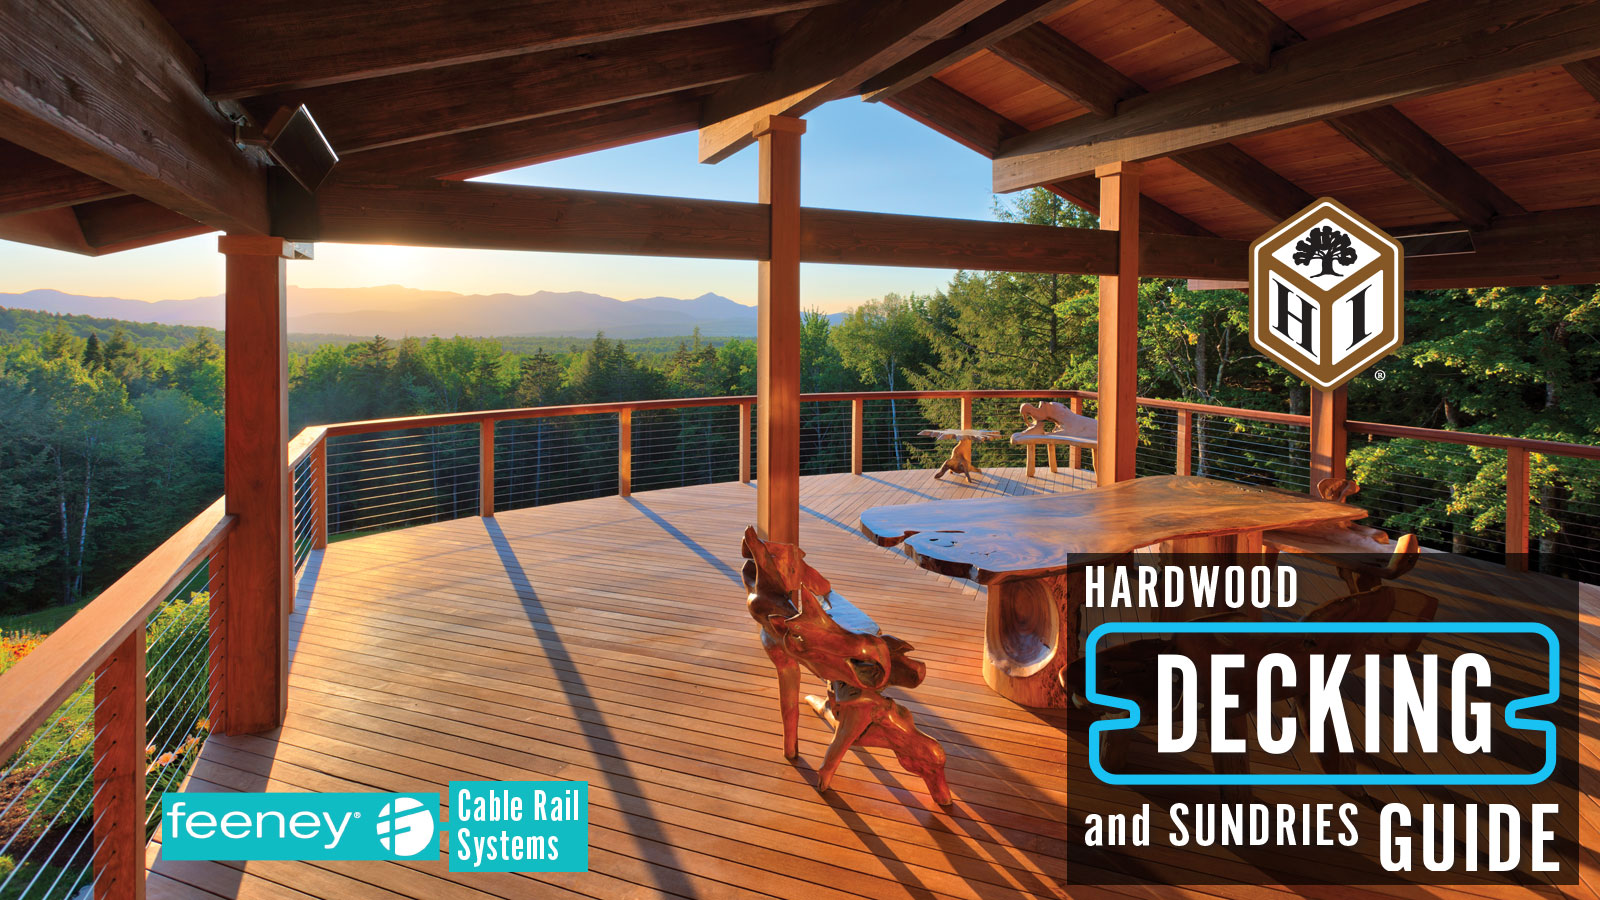 NEW! Hardwood Decking ans Sundries Guide